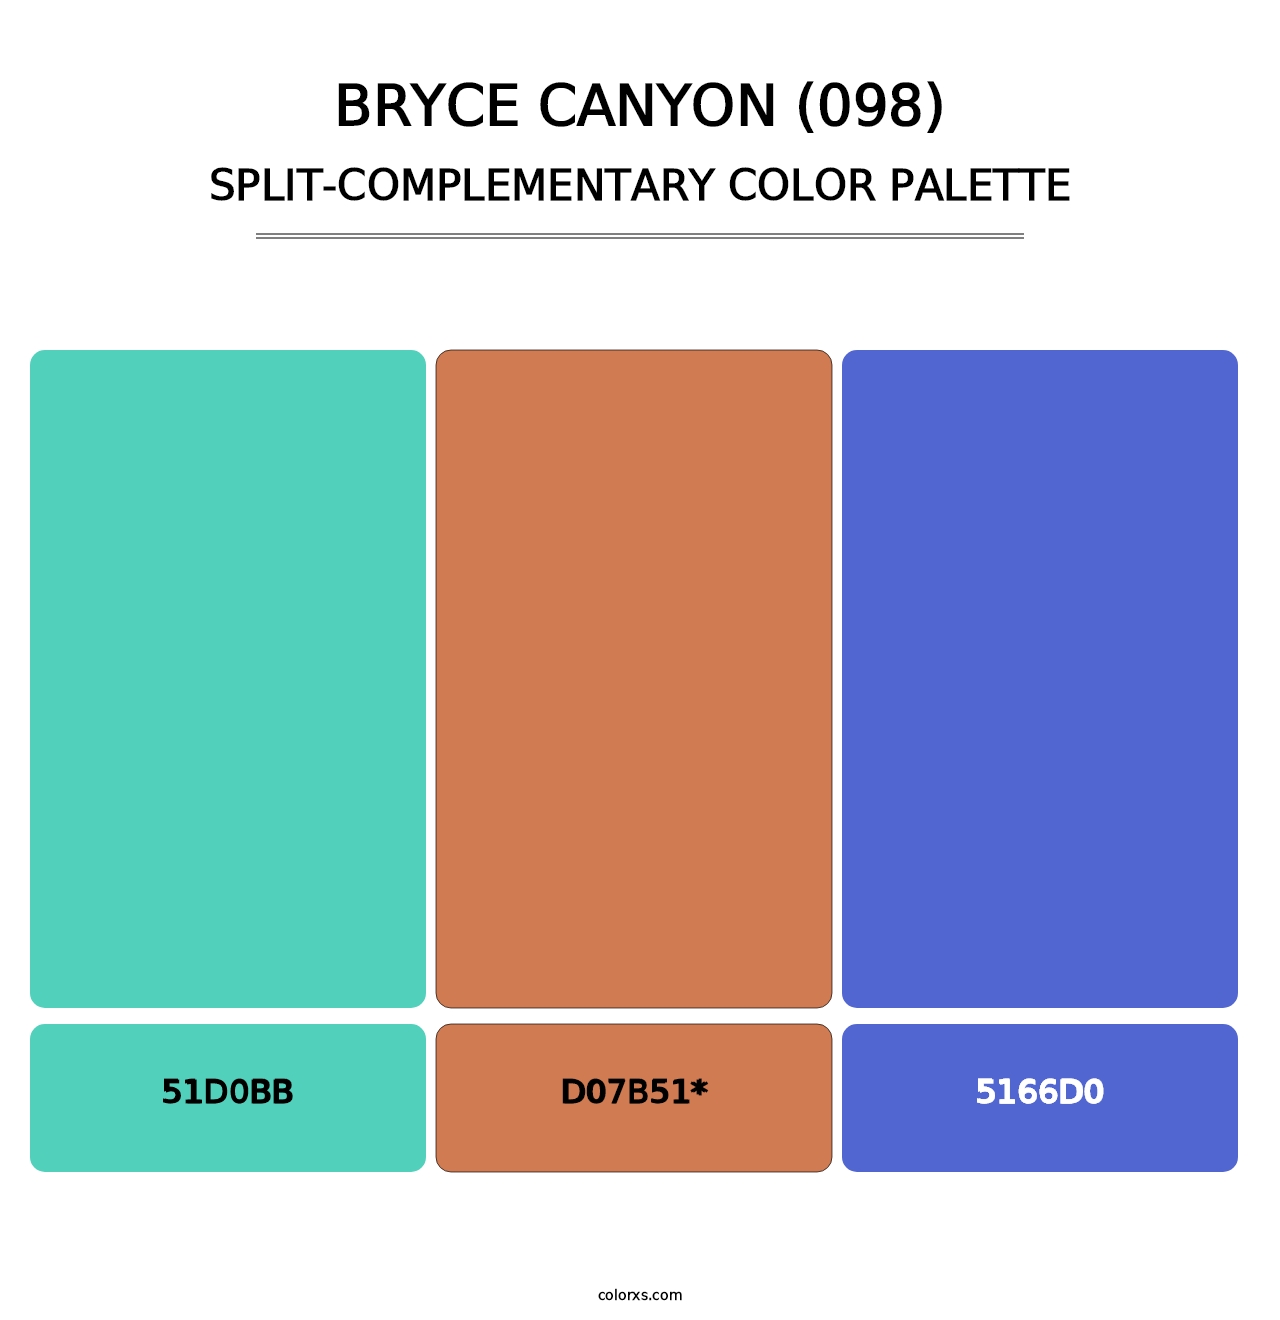 Bryce Canyon (098) - Split-Complementary Color Palette